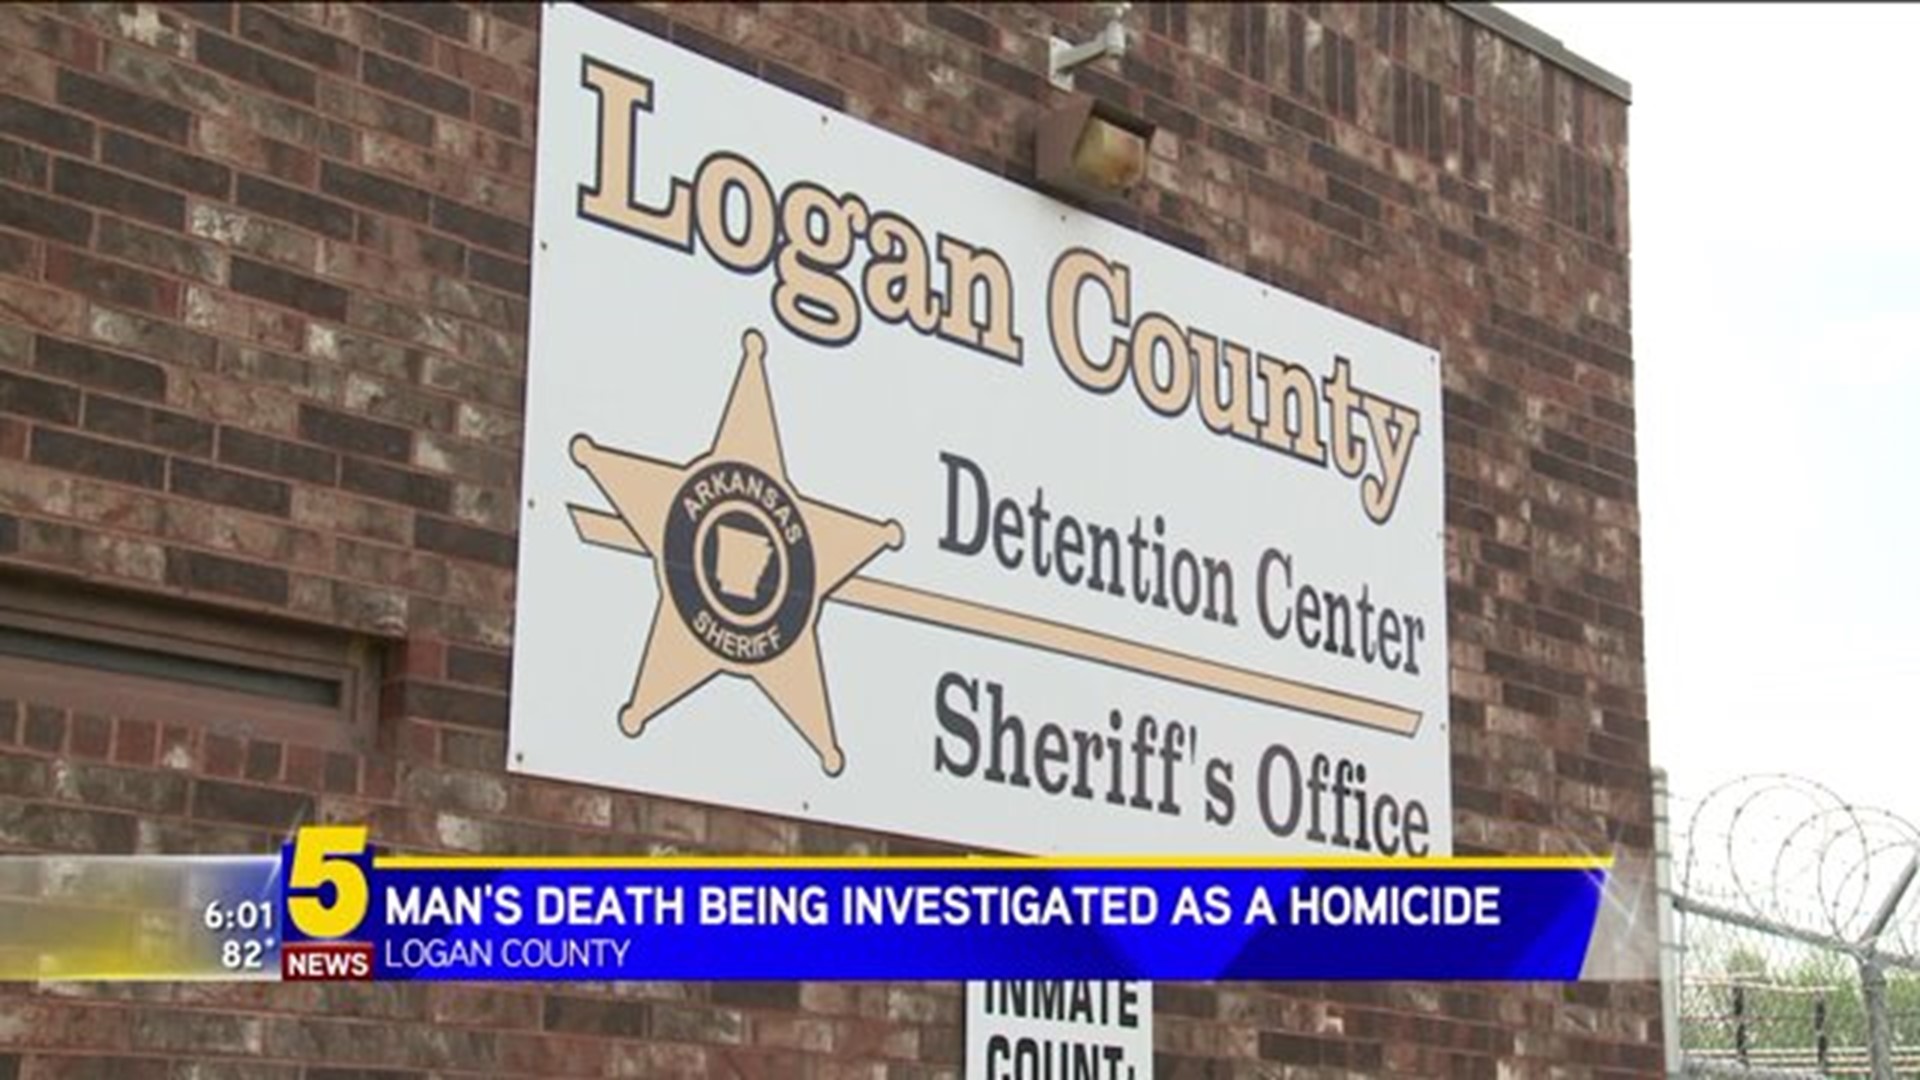 Logan County Sheriff Follows Up On Several Leads In Homicide Investigation